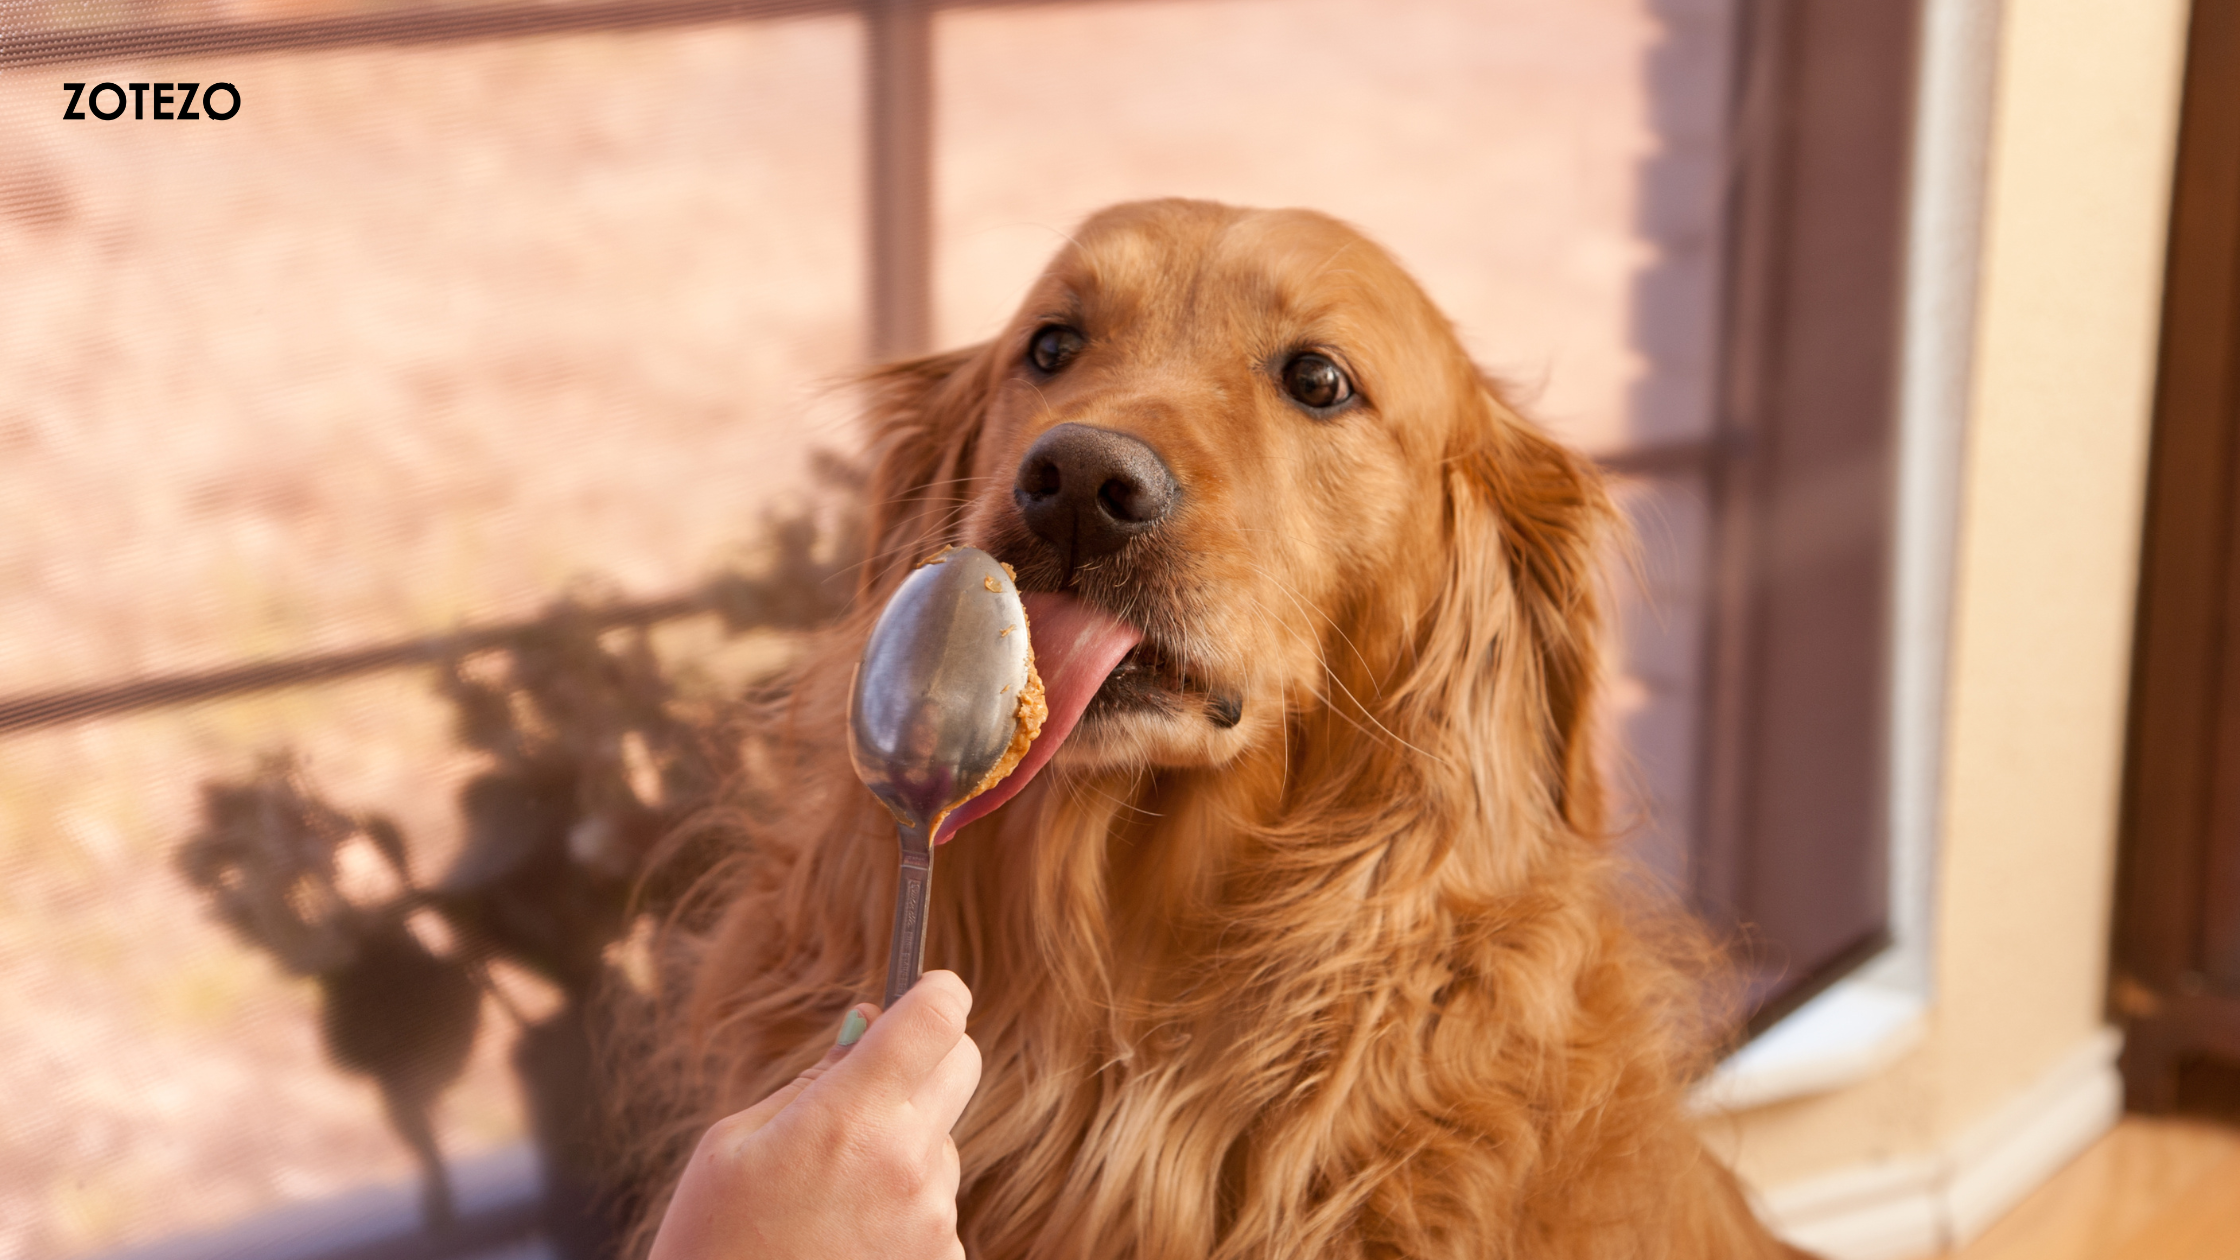 Peanut Butter For Dogs in UAE